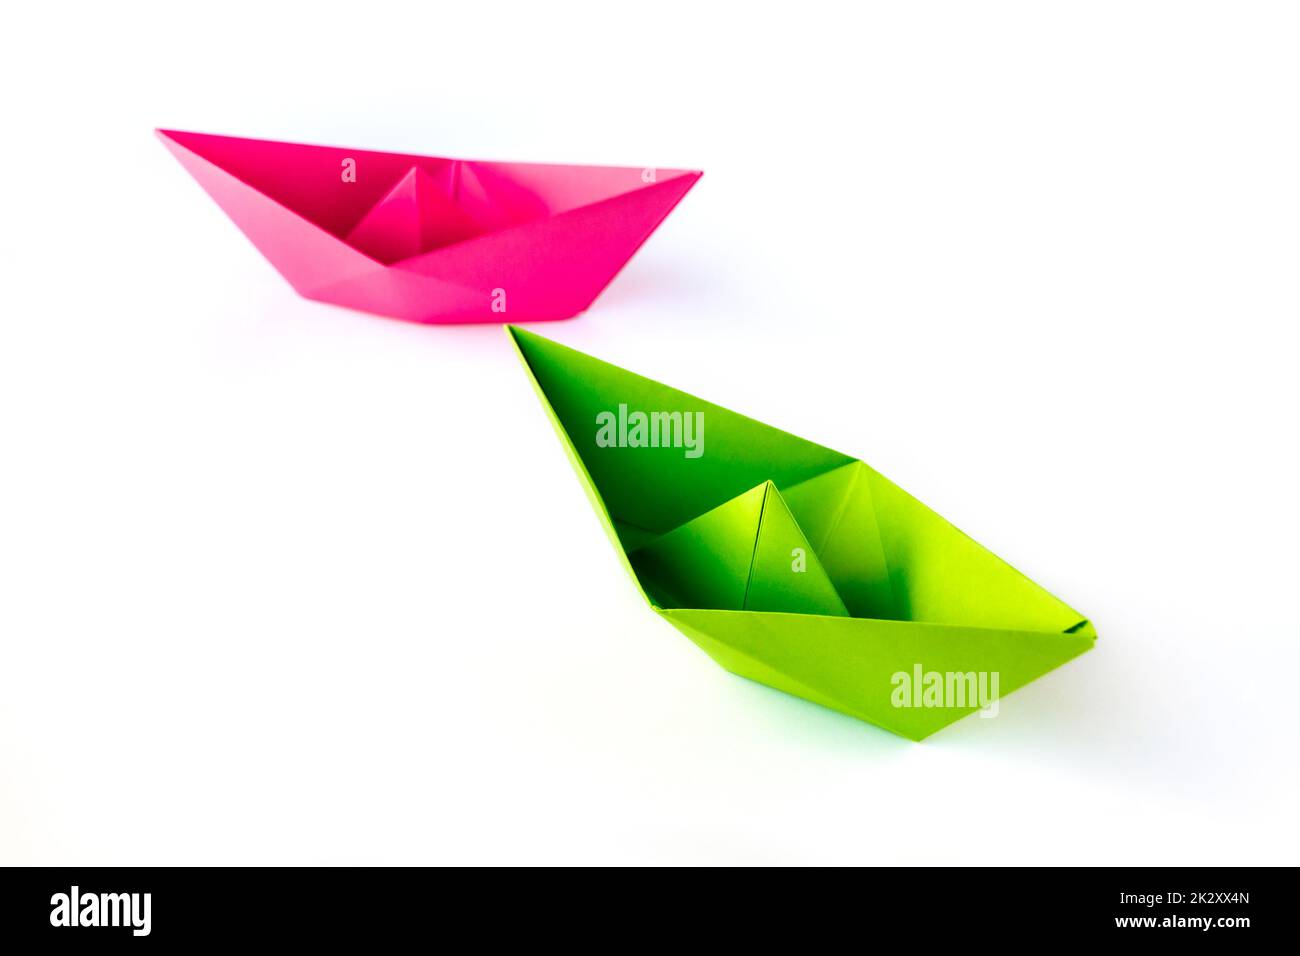 Pink and green paper boat origami isolated on a white background Stock Photo